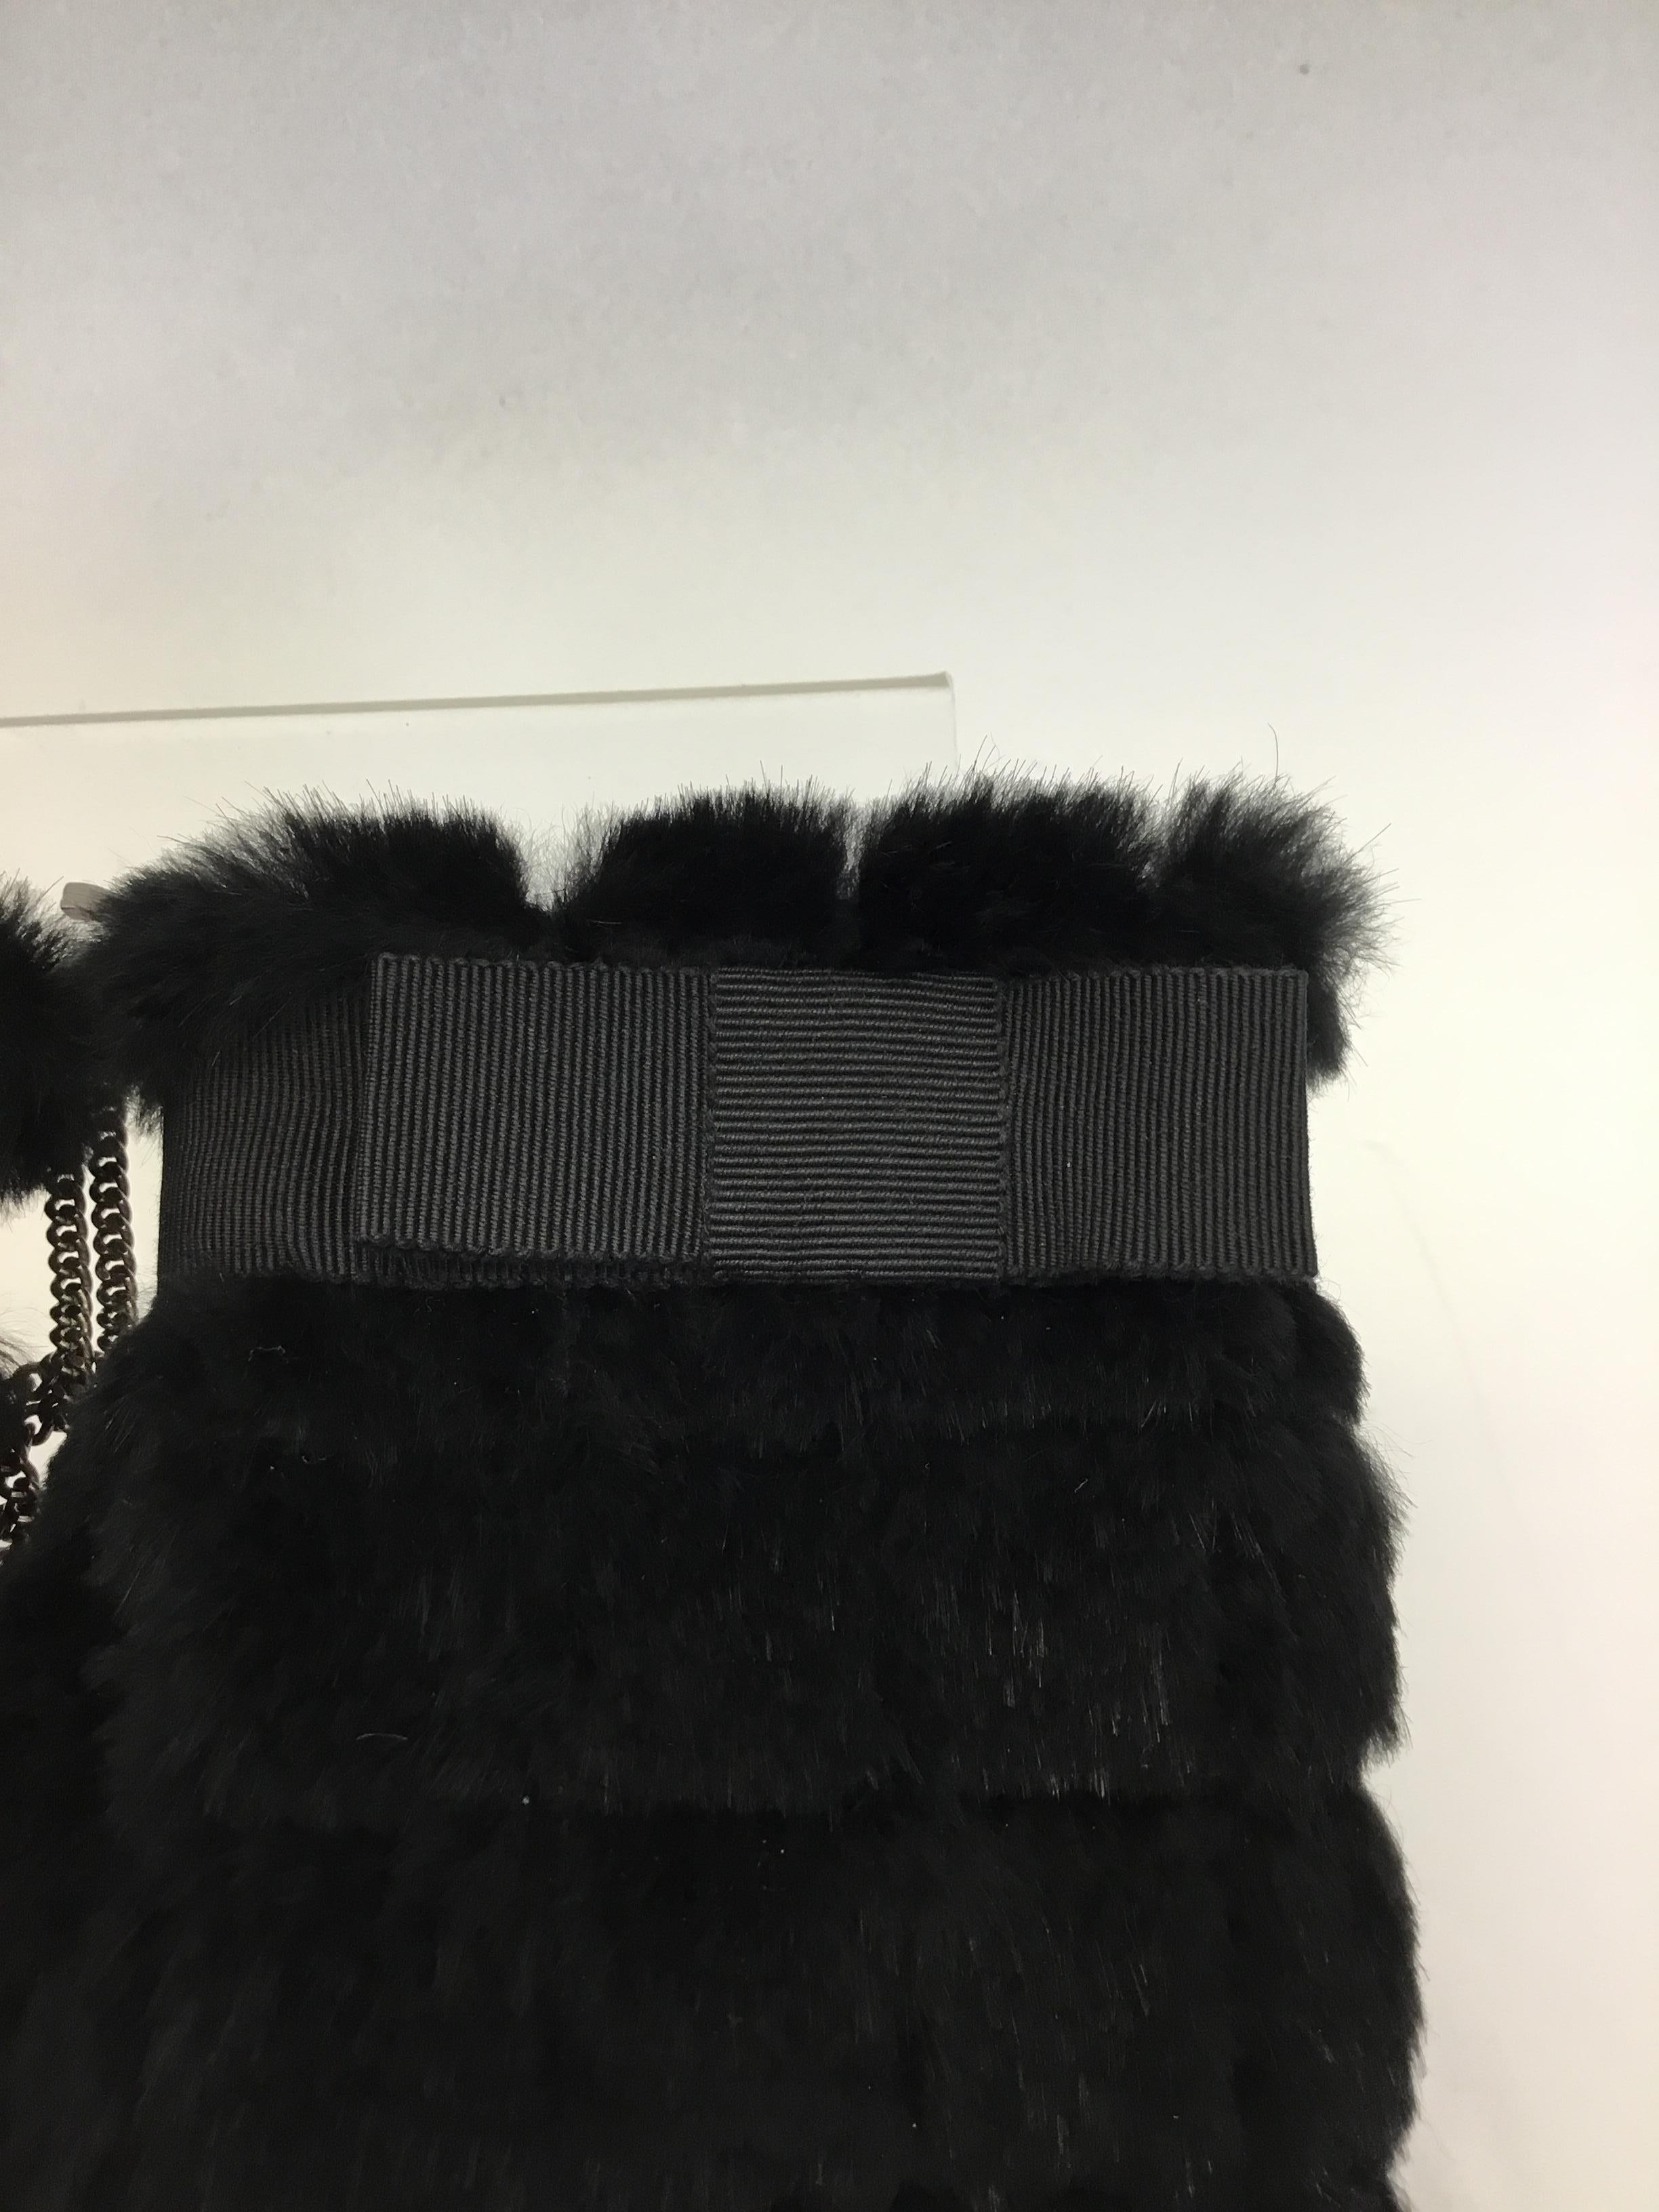 Chanel Knit Rabbit Fur Mittens with Chain
$399
Comes with box
Made in Belgium 
100% Rabbit fur
Size medium